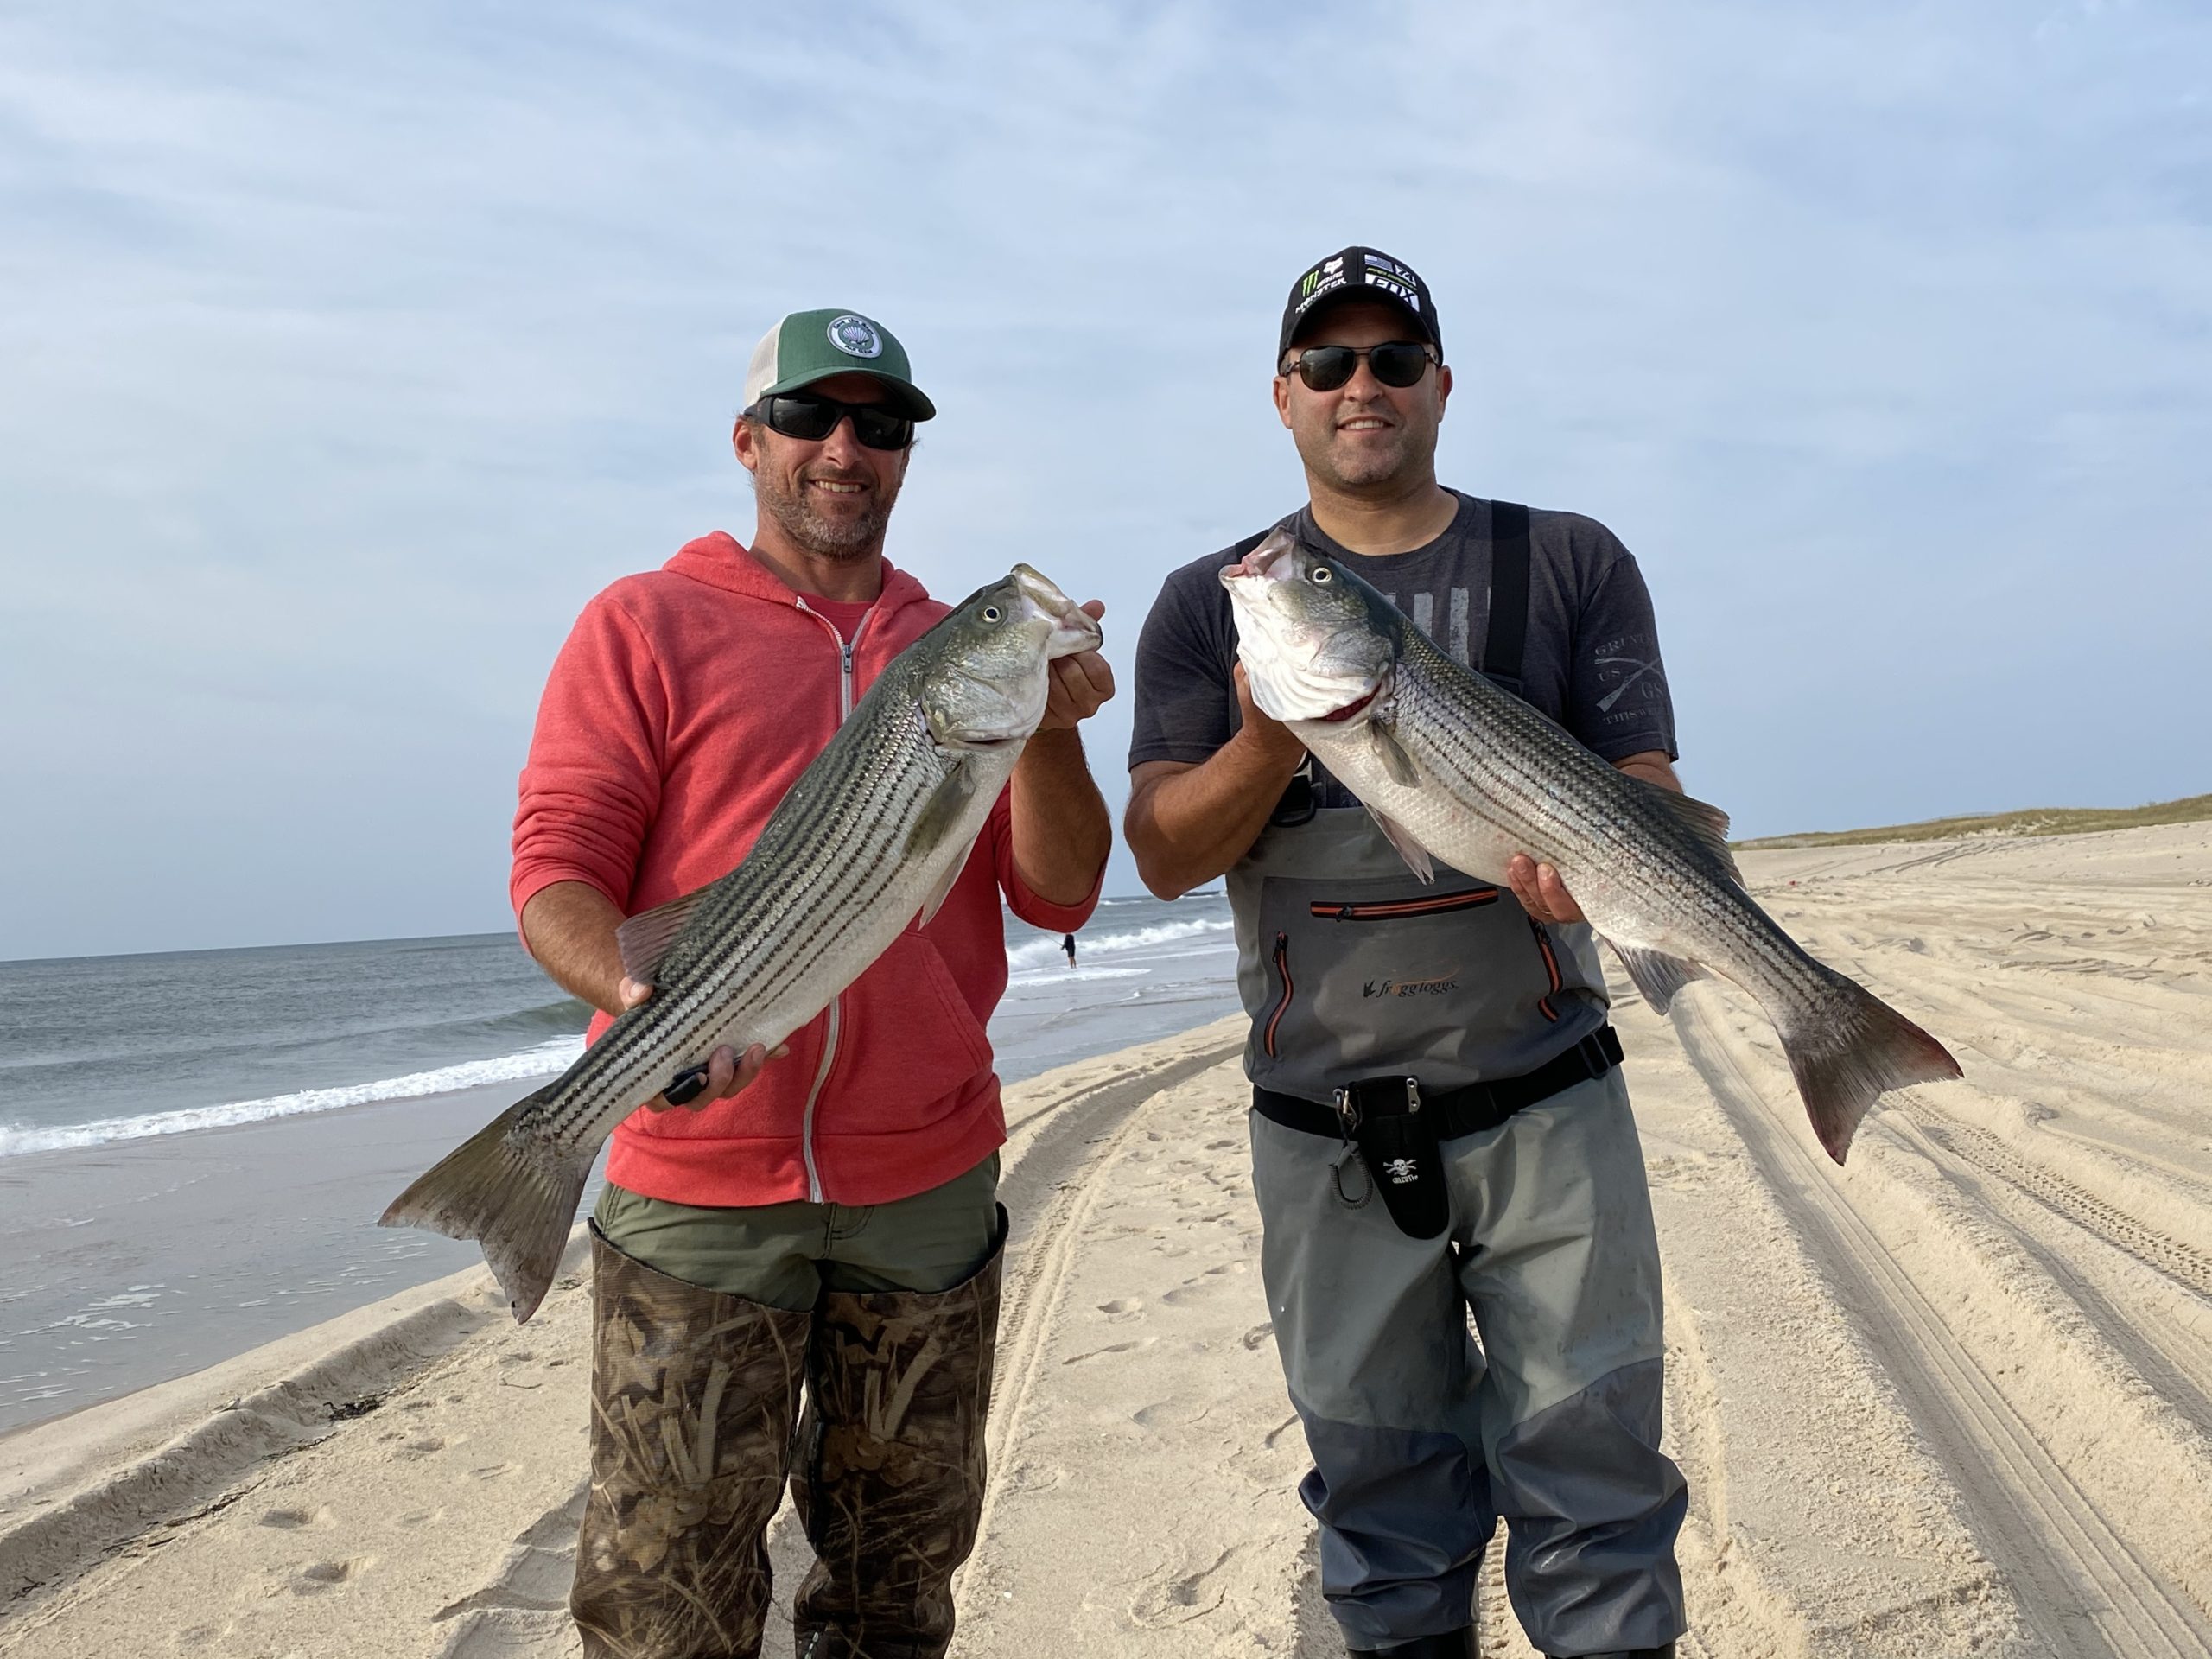 Shawn Deuel and Dean McNamara with the spoils of the good striped bass fishing on local beaches over the weekend. 